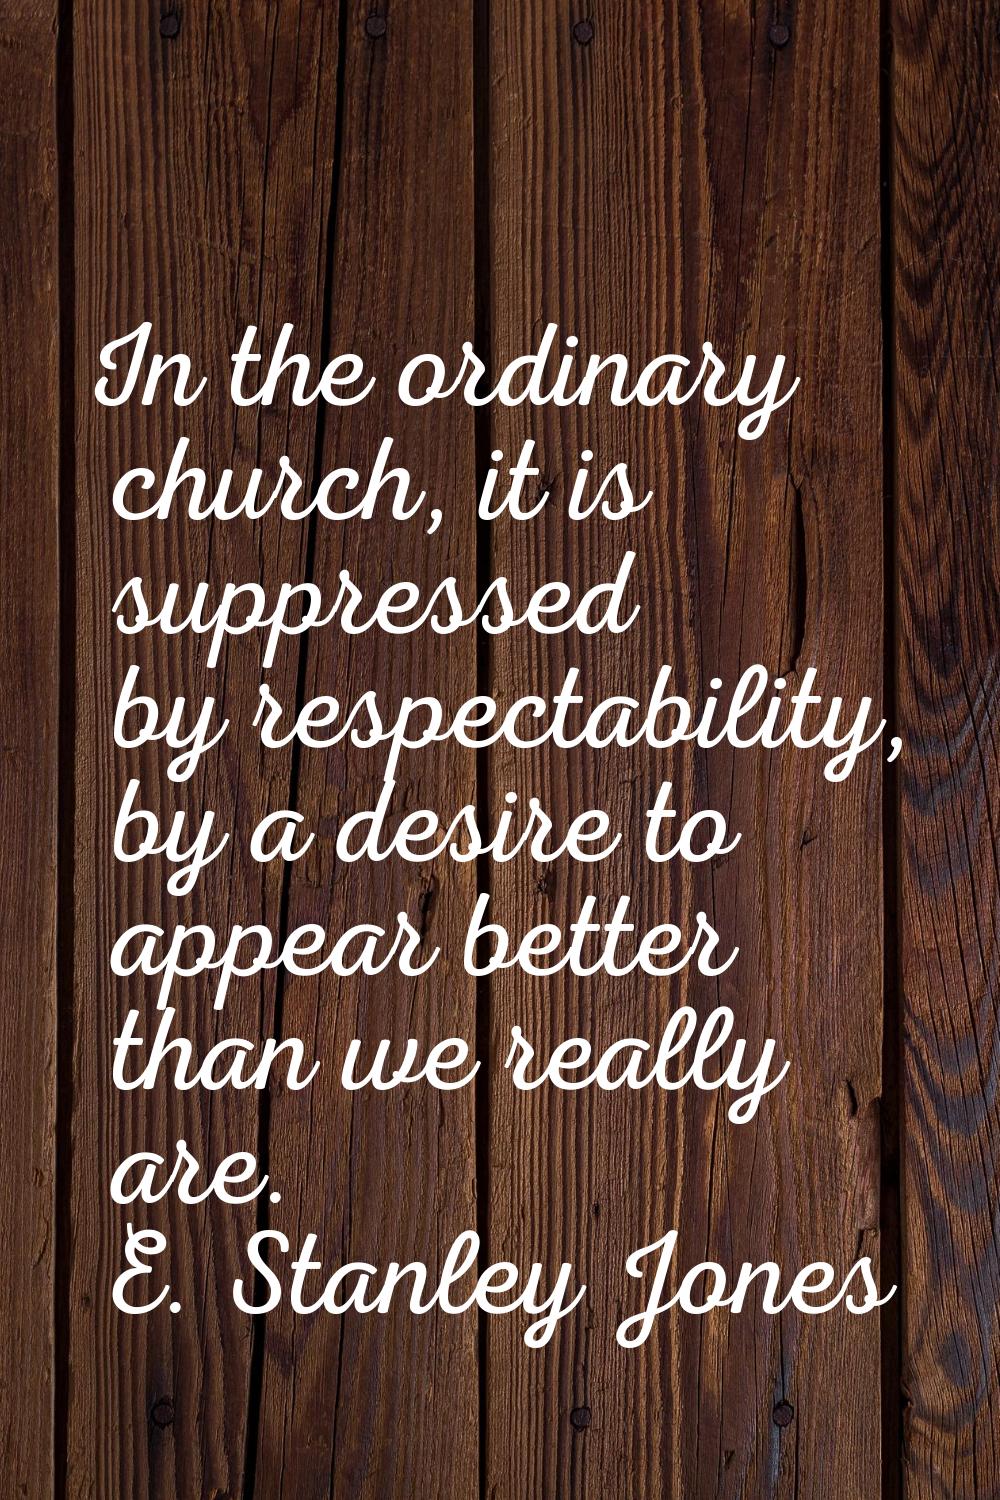 In the ordinary church, it is suppressed by respectability, by a desire to appear better than we re